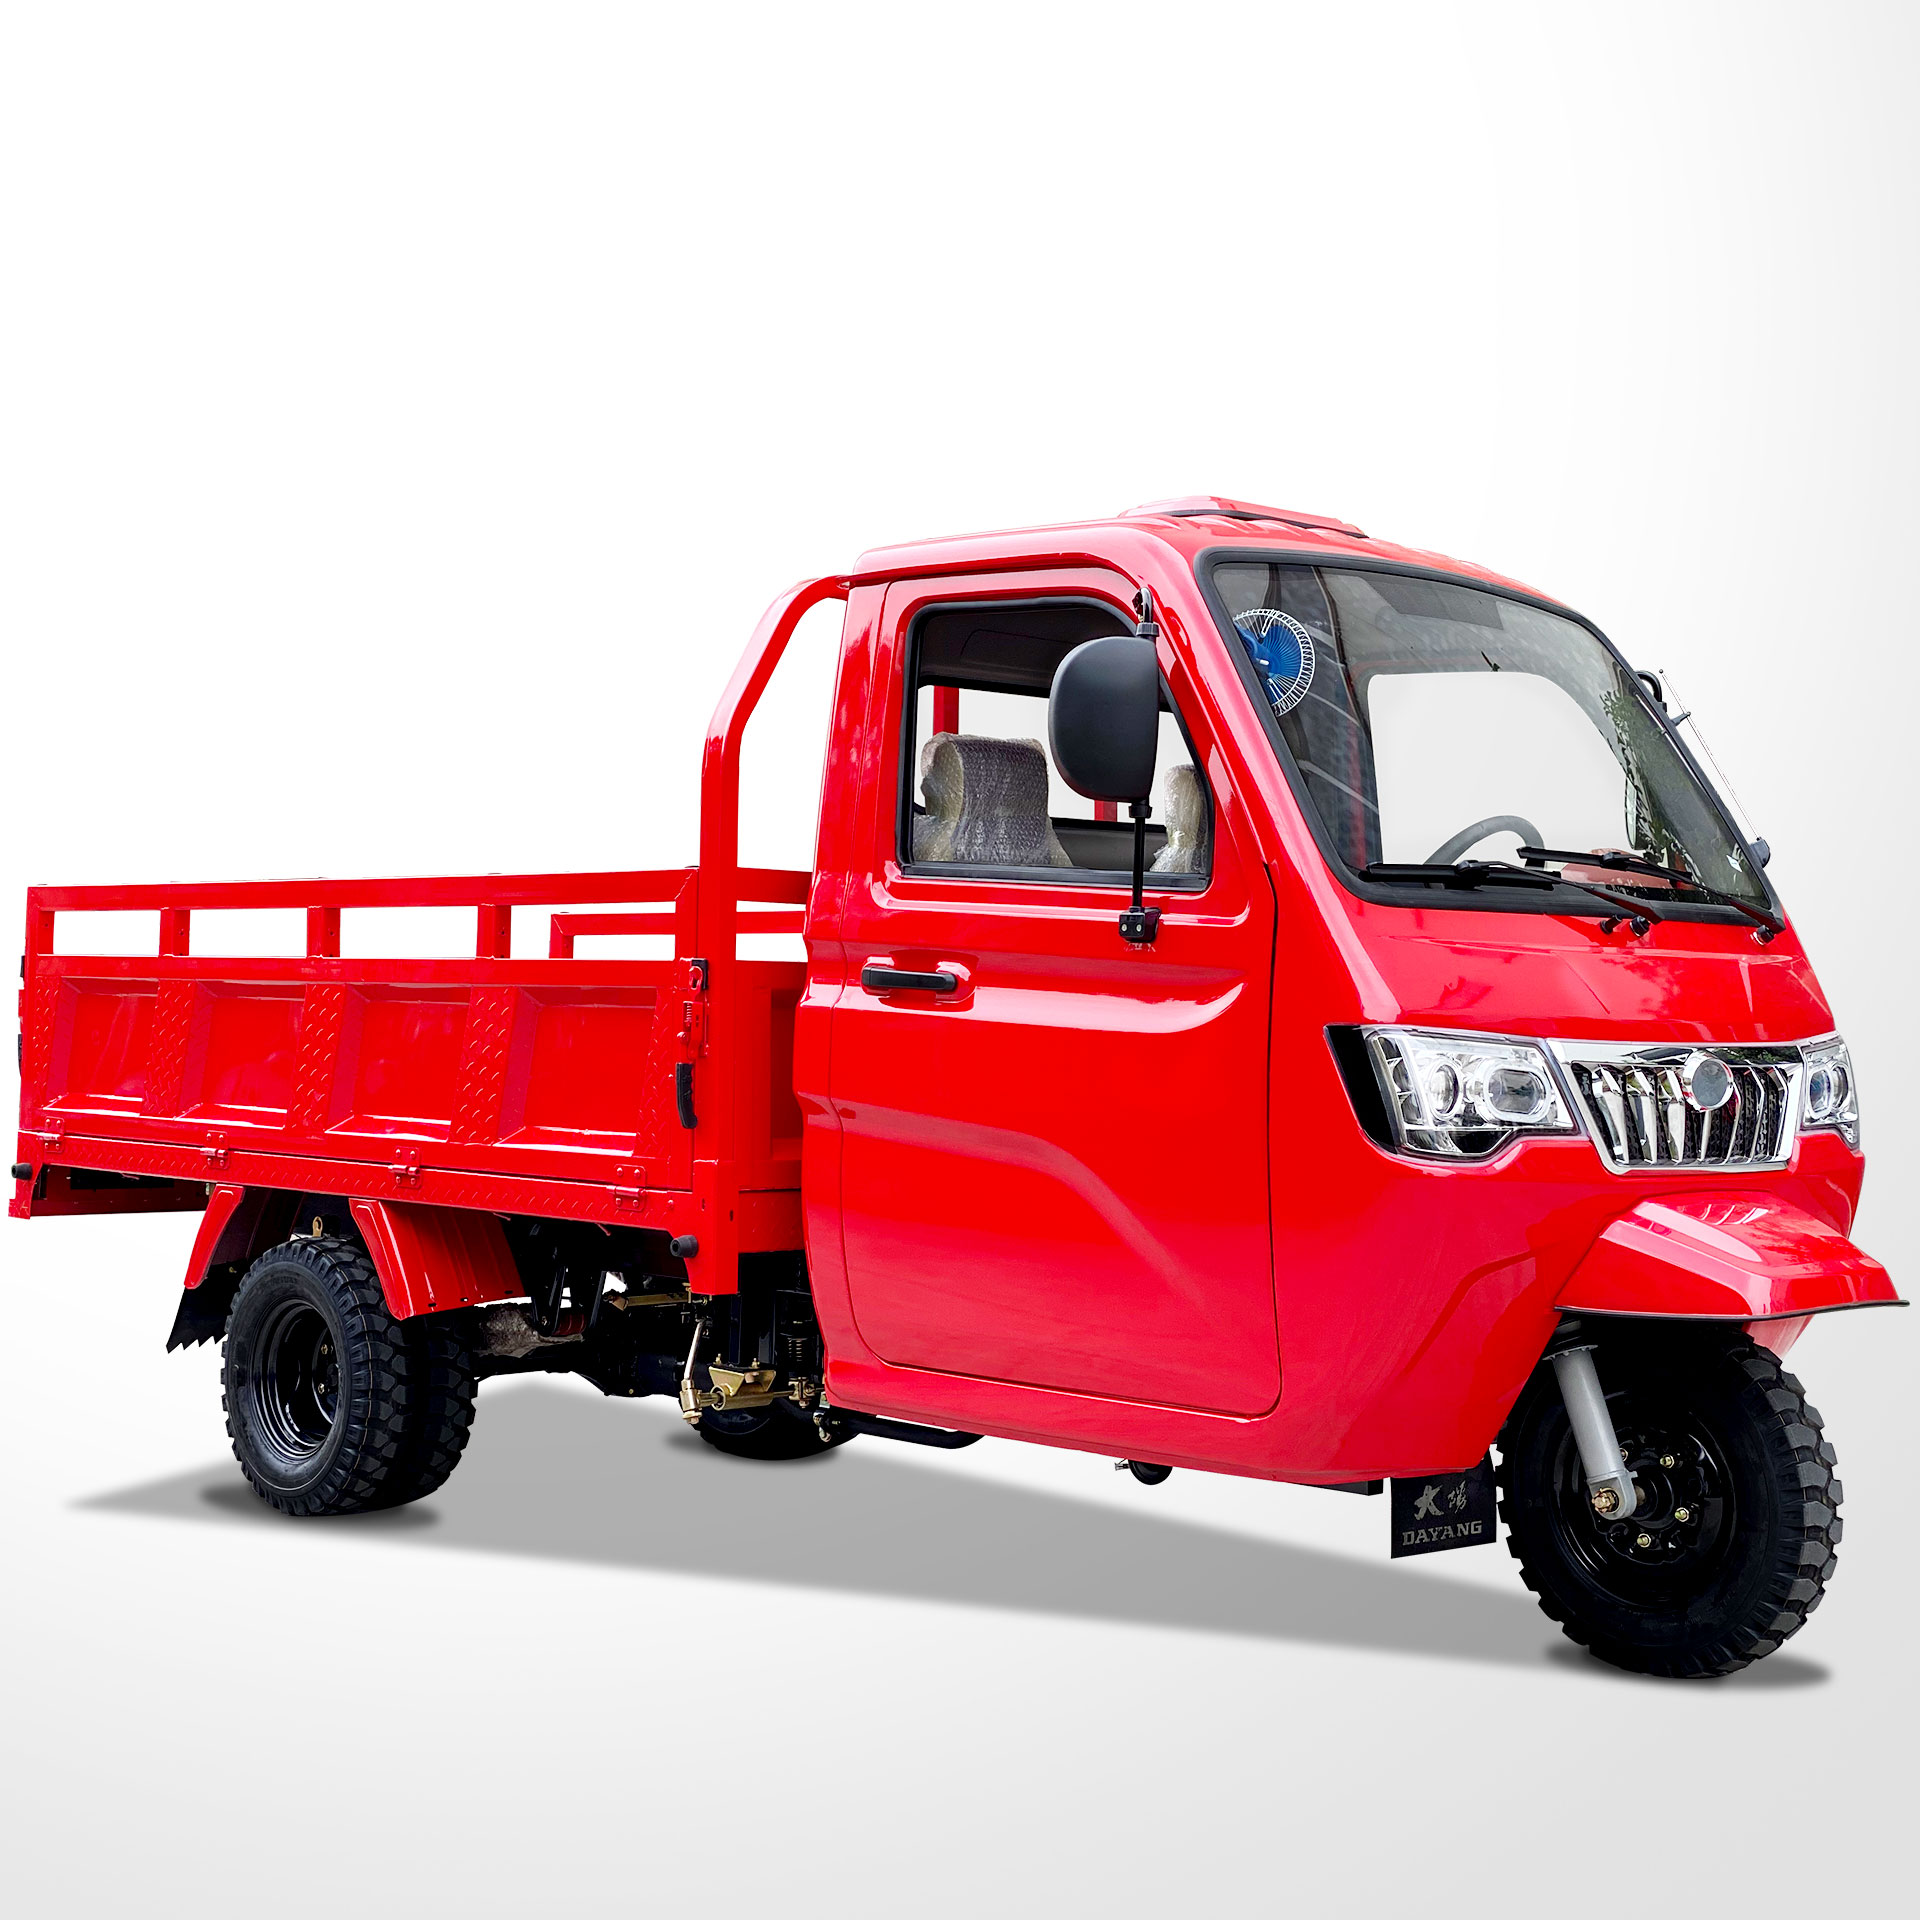 DAYANG high cost performance Enclosed cabin heavy loading tricycle with powerful engine and big cargo truck tricycle